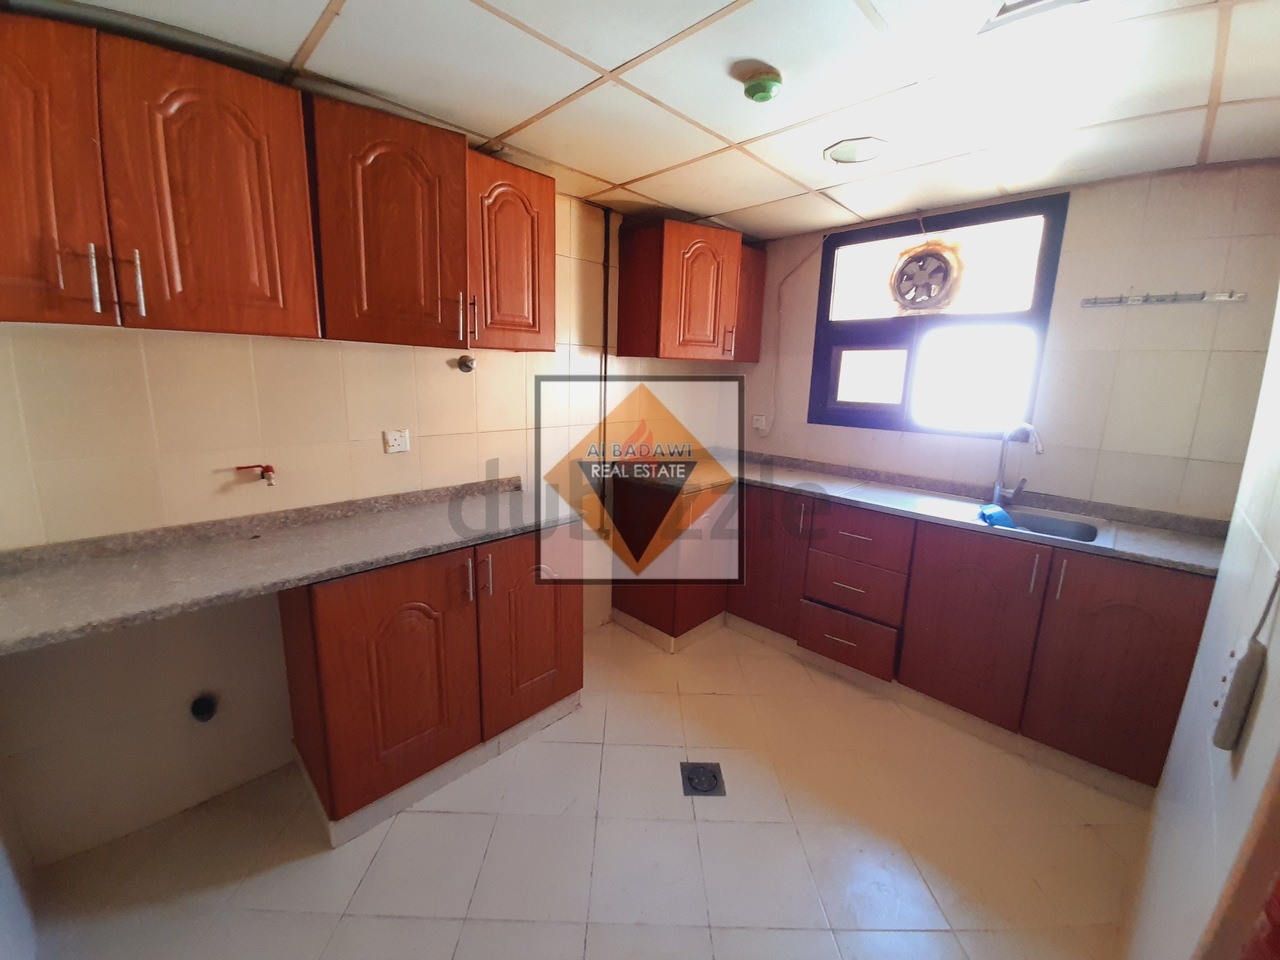 Lavish 2bedroom Apartment With Balcony Central Ac Close Hall In Just 25k At Muwaileh Sharjah